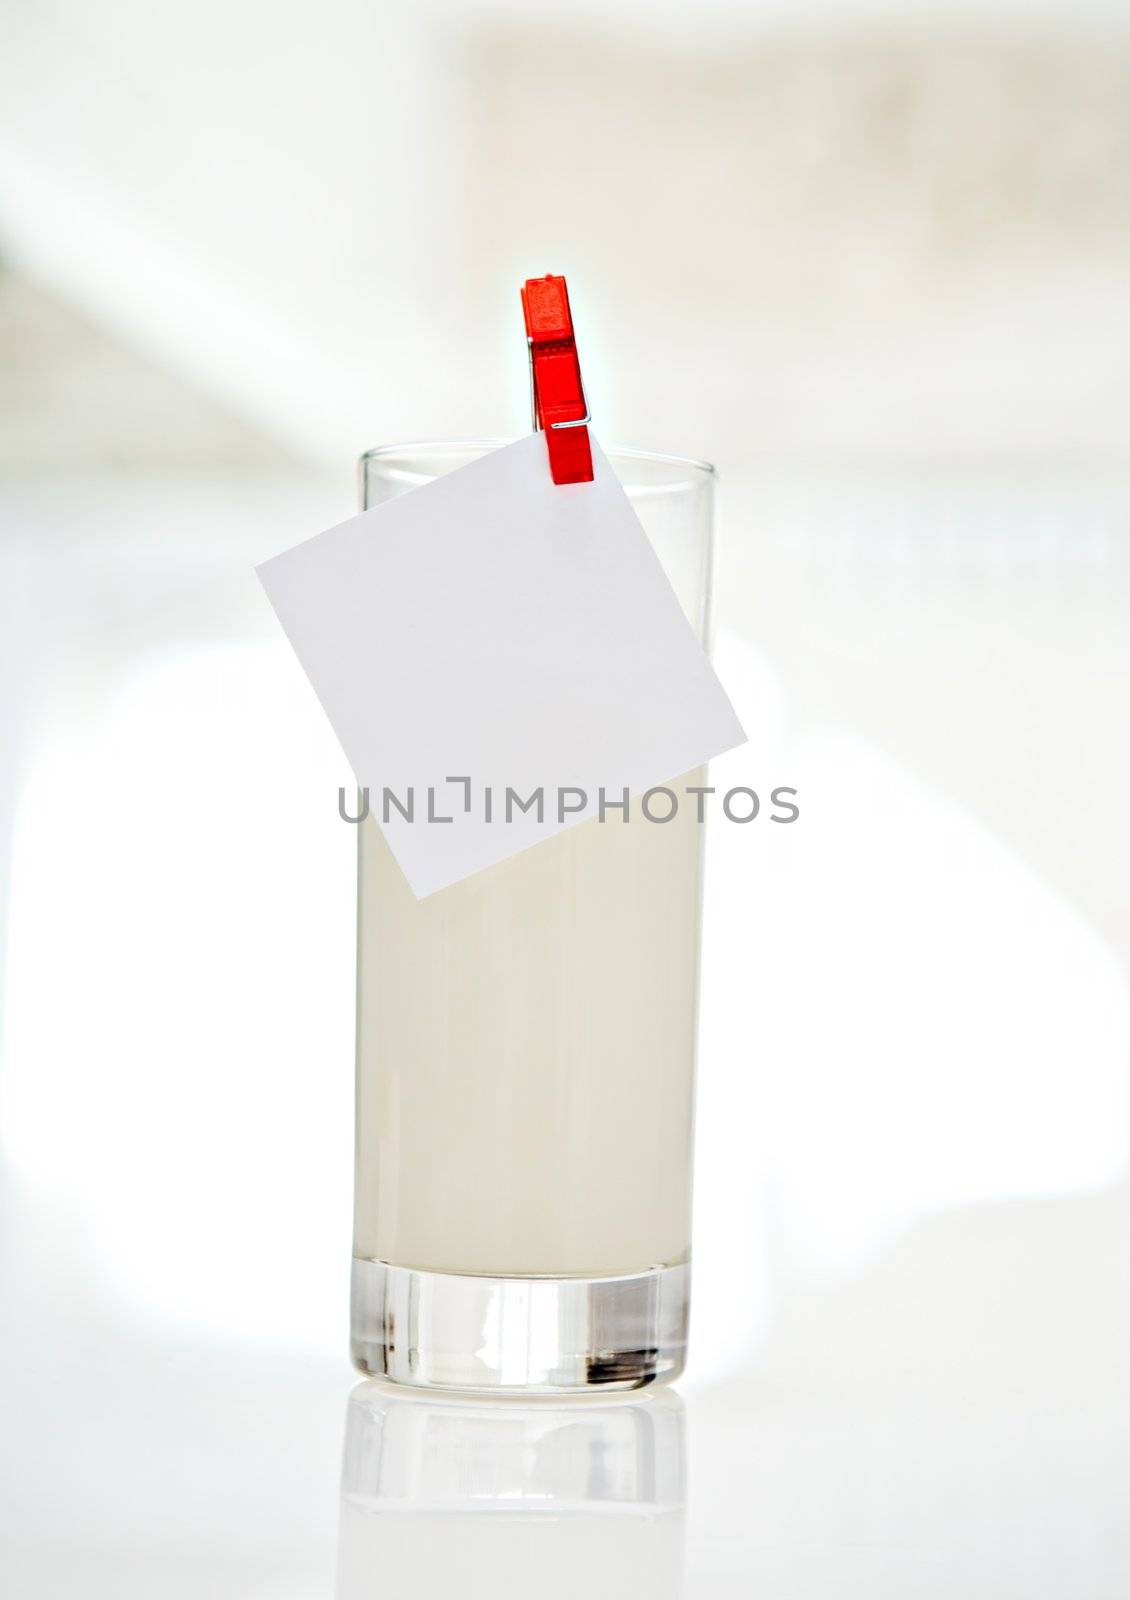 Note is attached to the glass of milk standing on a white table
